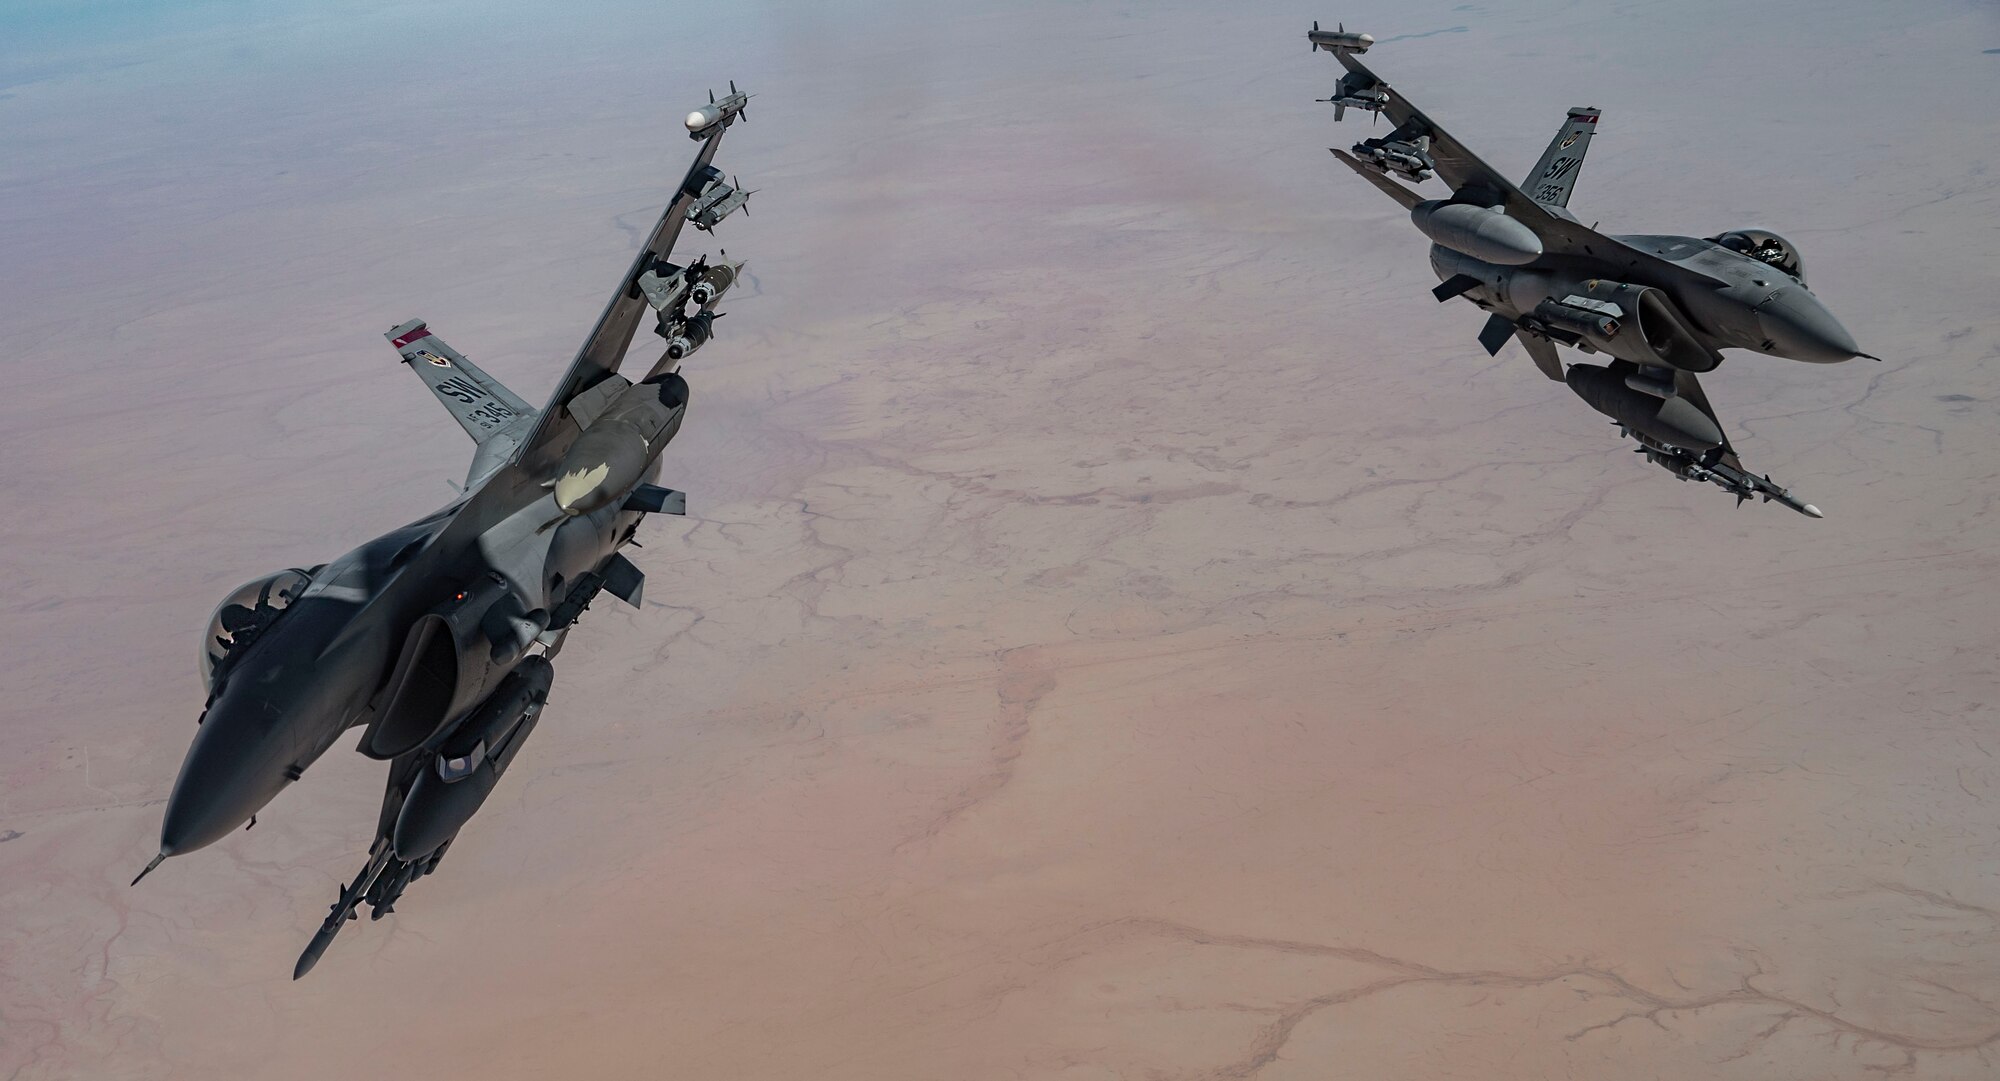 Two U.S. Air Force F-16 Fighting Falcon pilots depart after receiving fuel from a KC-135 Stratotanker, assigned to the 340th Expeditionary Aircraft Refueling Squadron, while flying routine operations over Southwest Asia Feb. 16th, 2021.